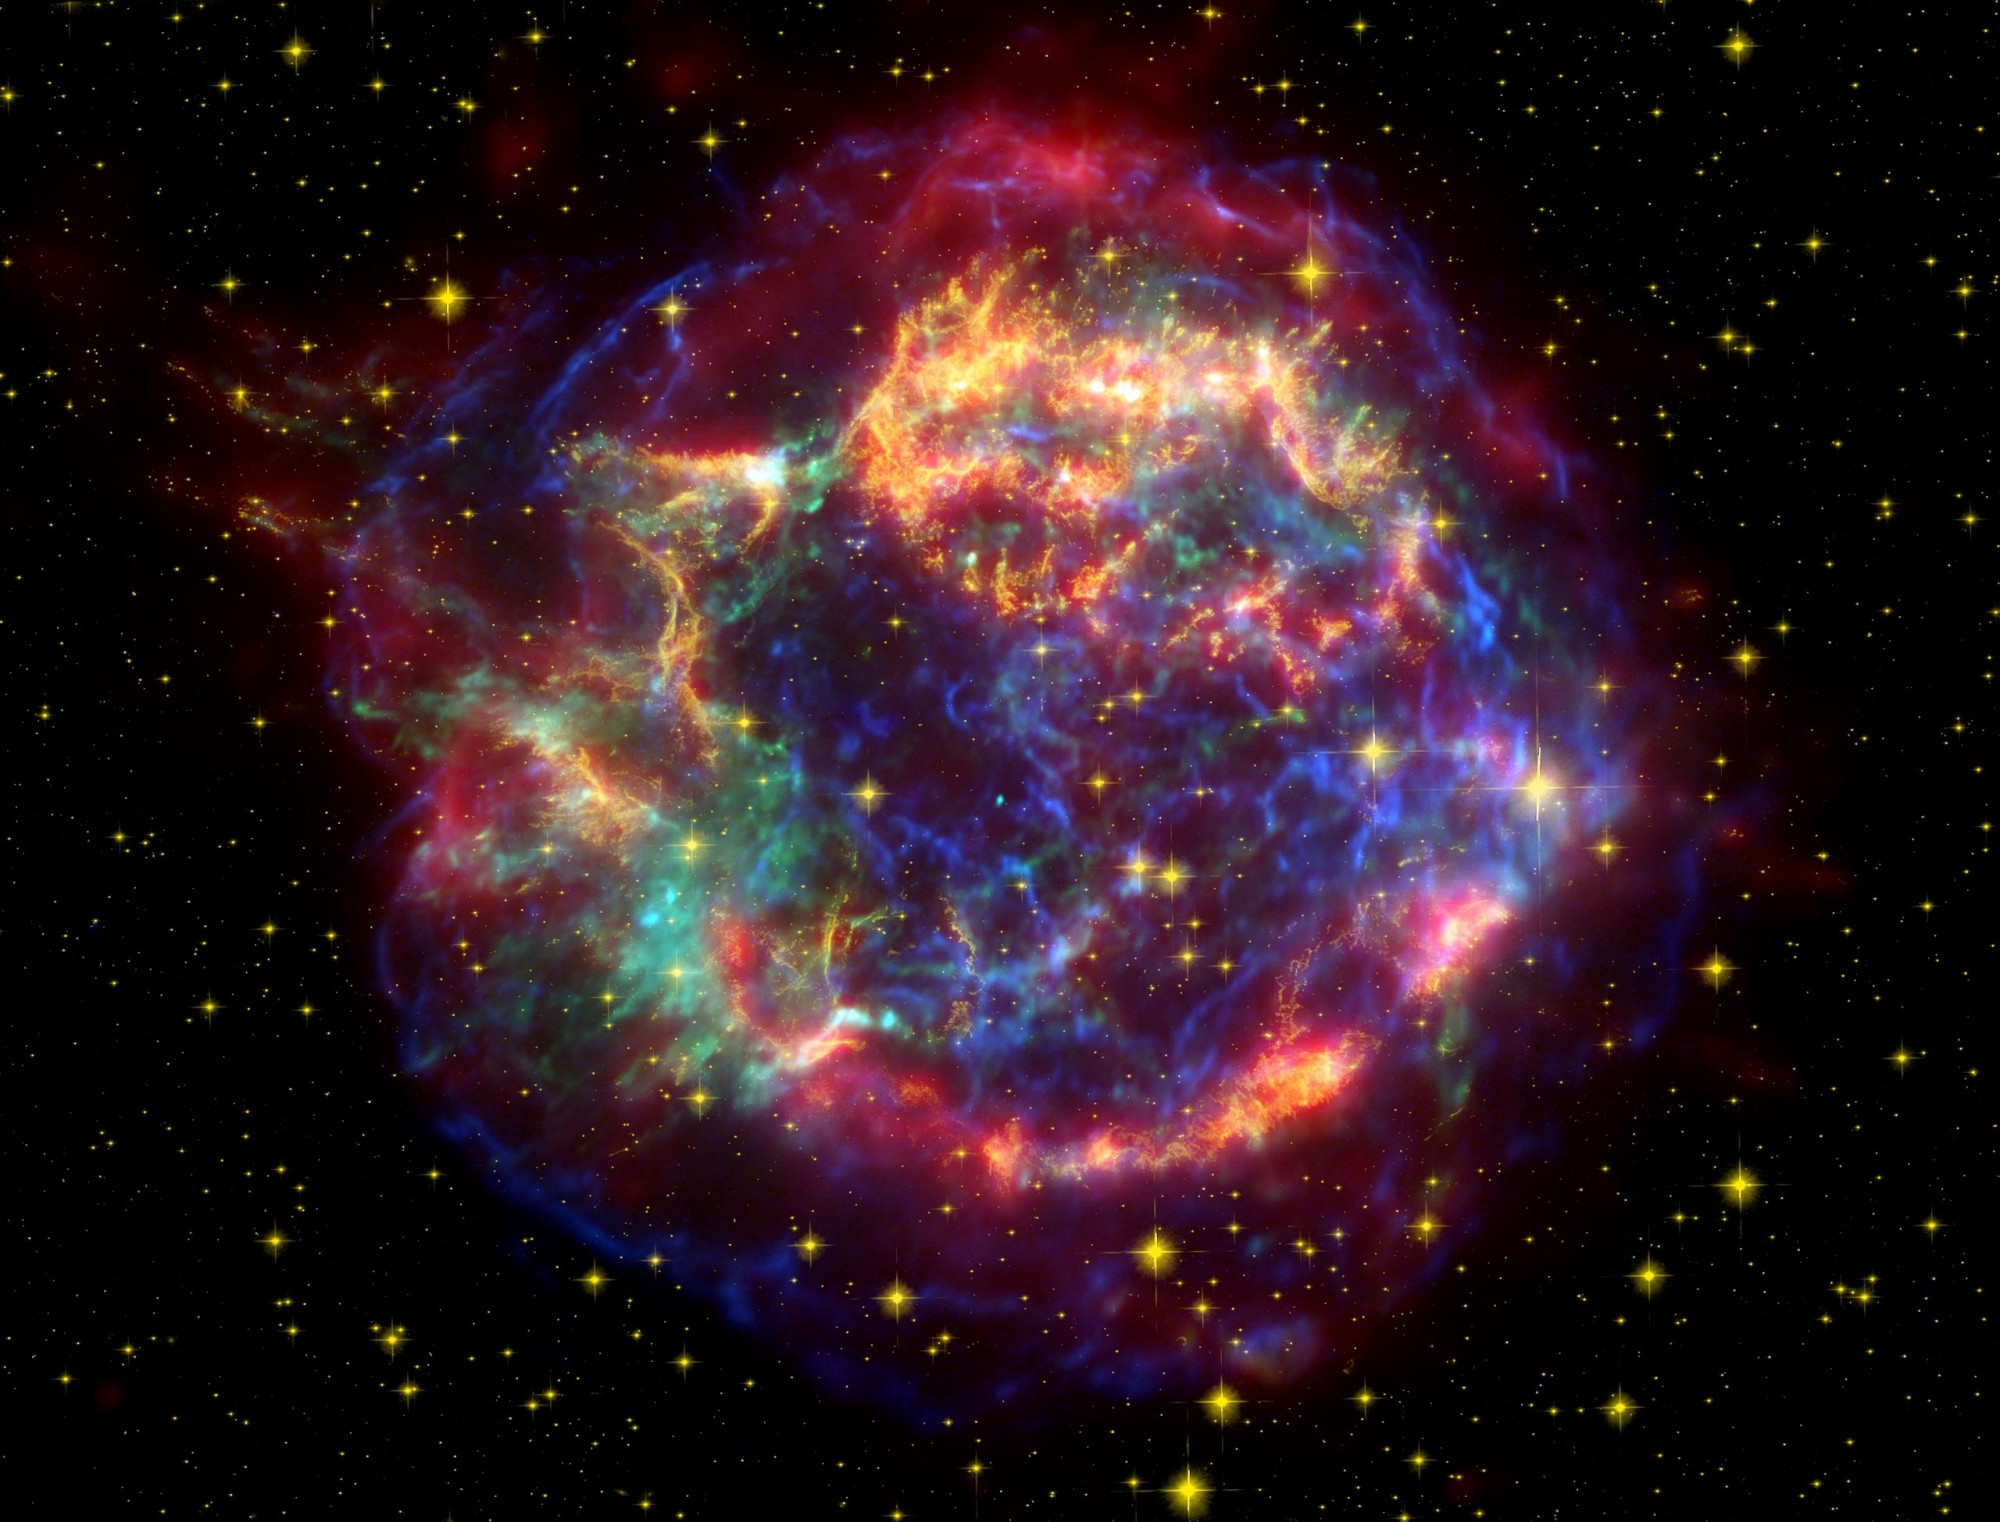 Supernova Remnant Cassiopeia A is Lopsided